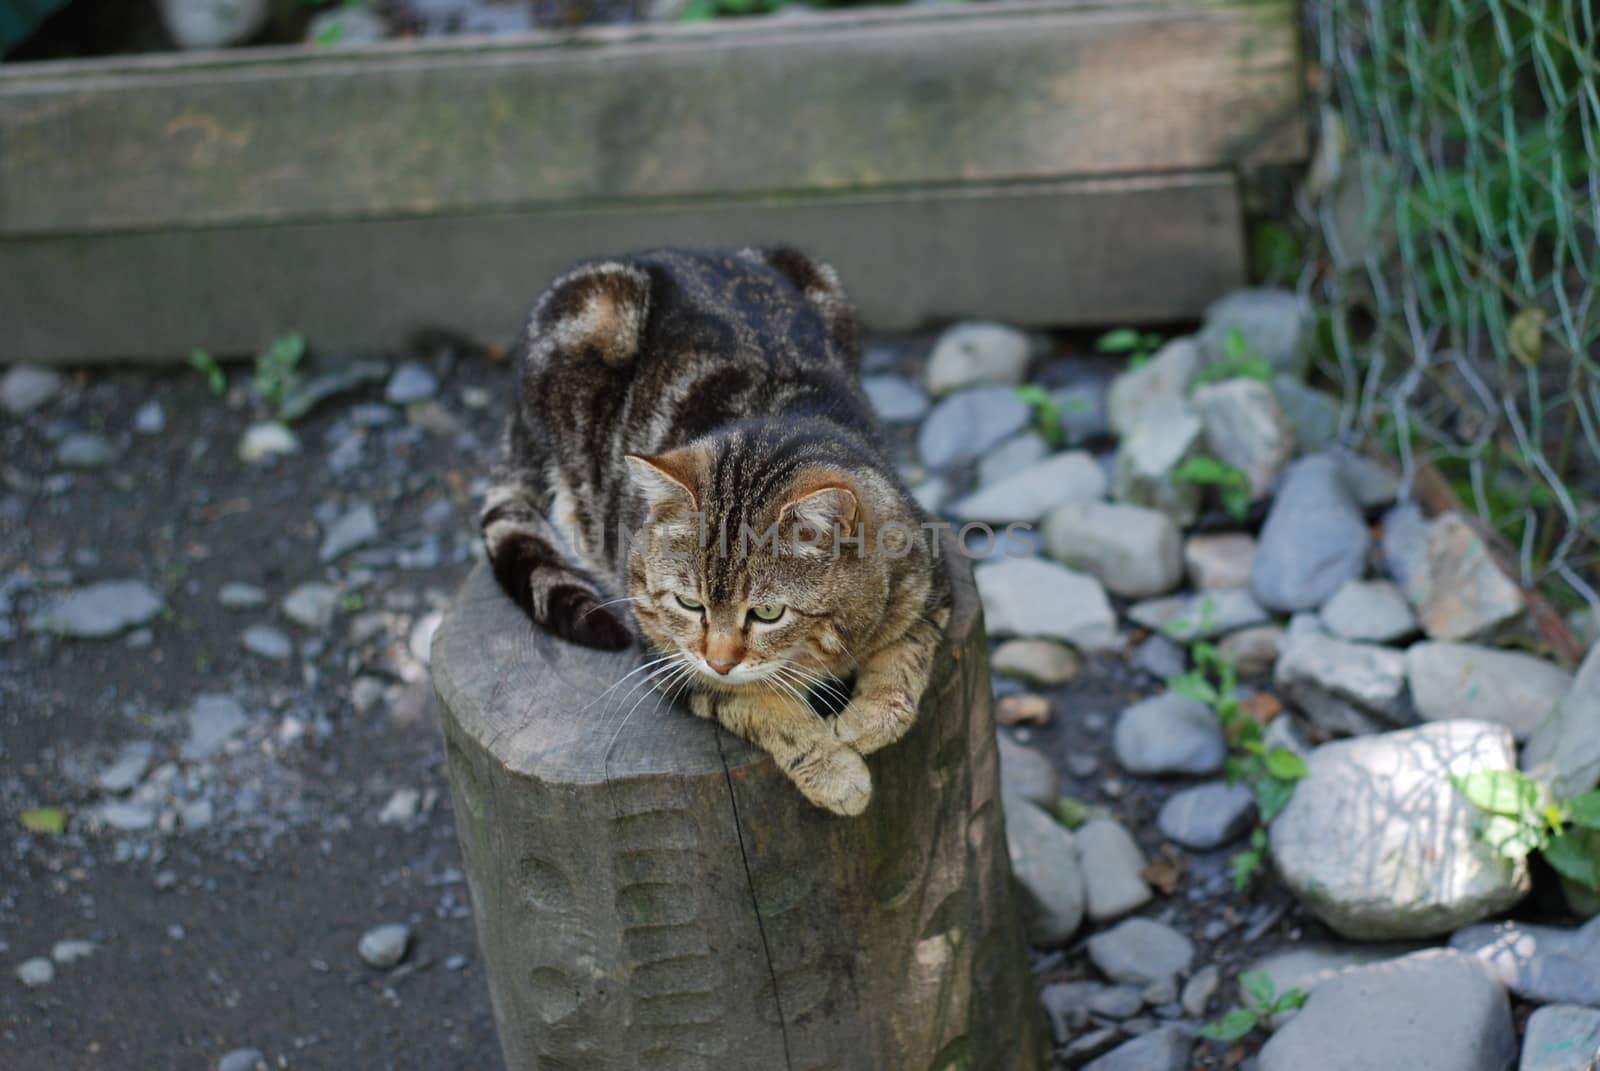 Striped cat chilling on the log of wood in a cage